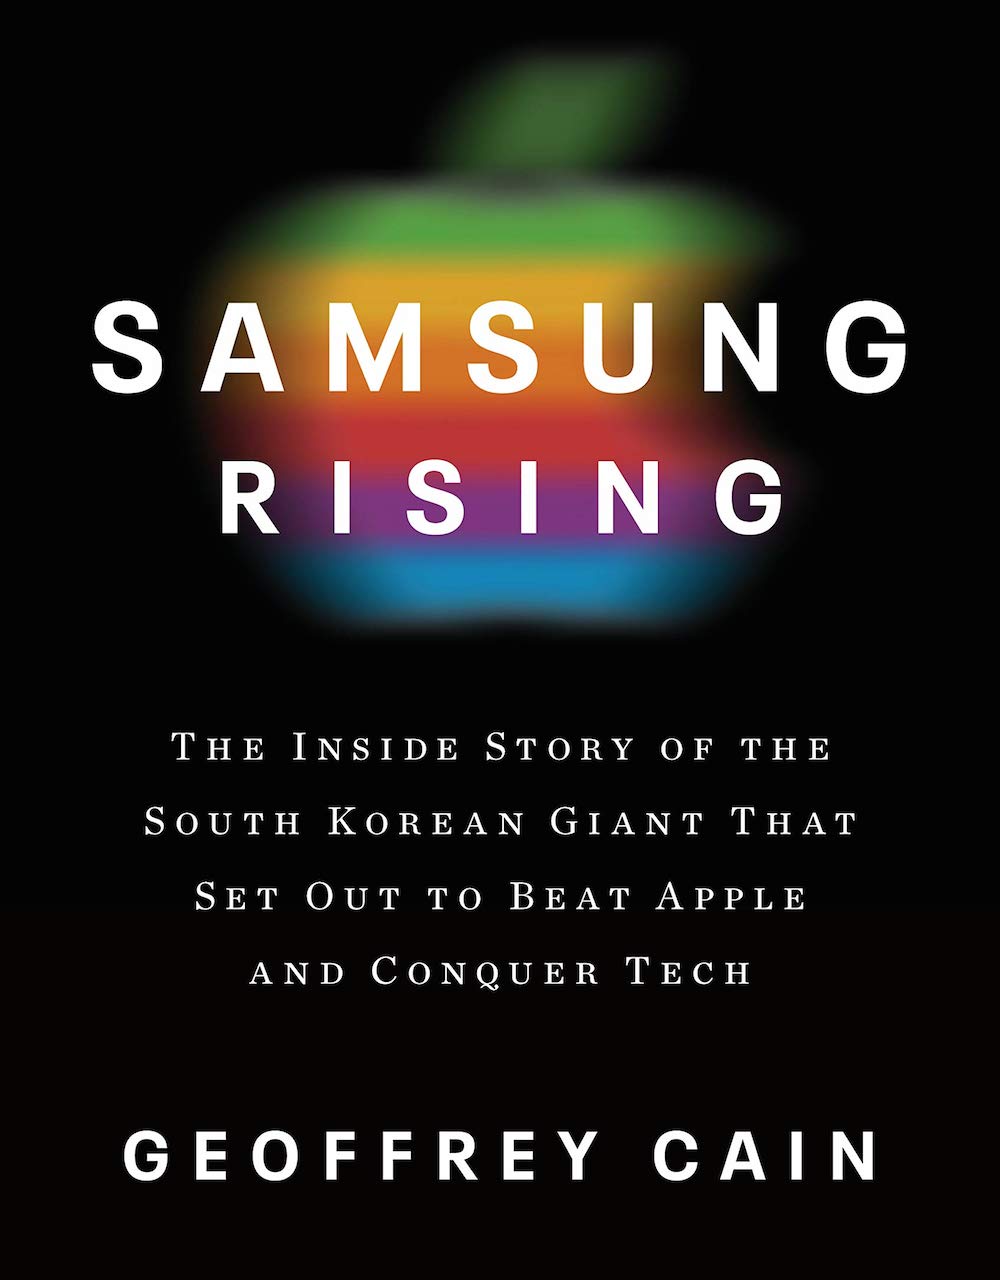 Korea Blog: “Samsung Rising,” from Nation-Builder to (Would-Be) Apple-Killer